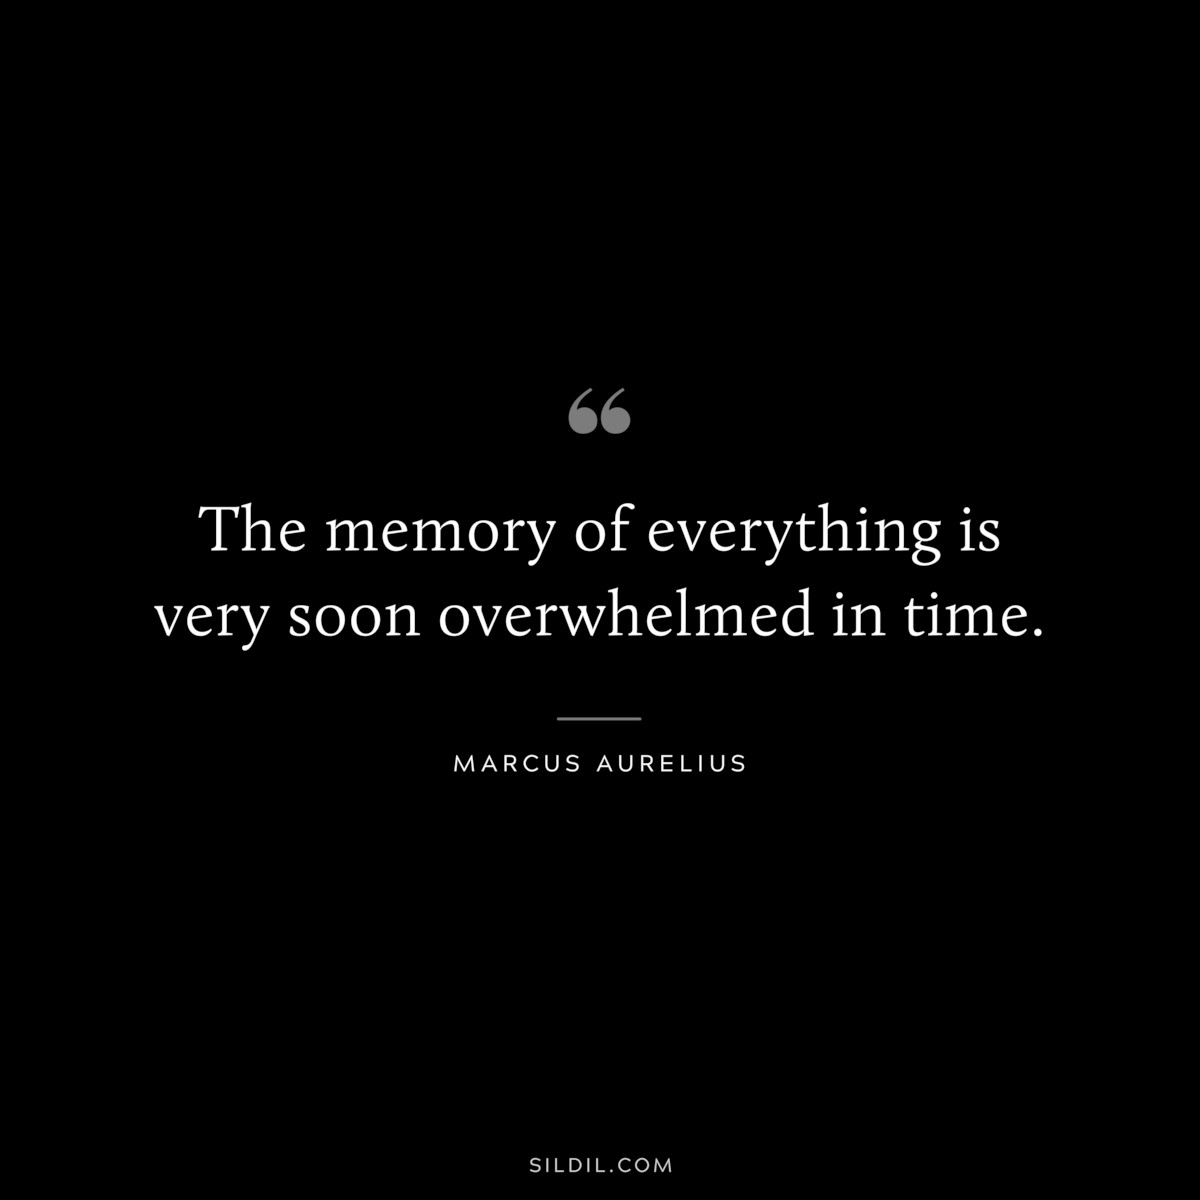 The memory of everything is very soon overwhelmed in time. ― Marcus Aurelius